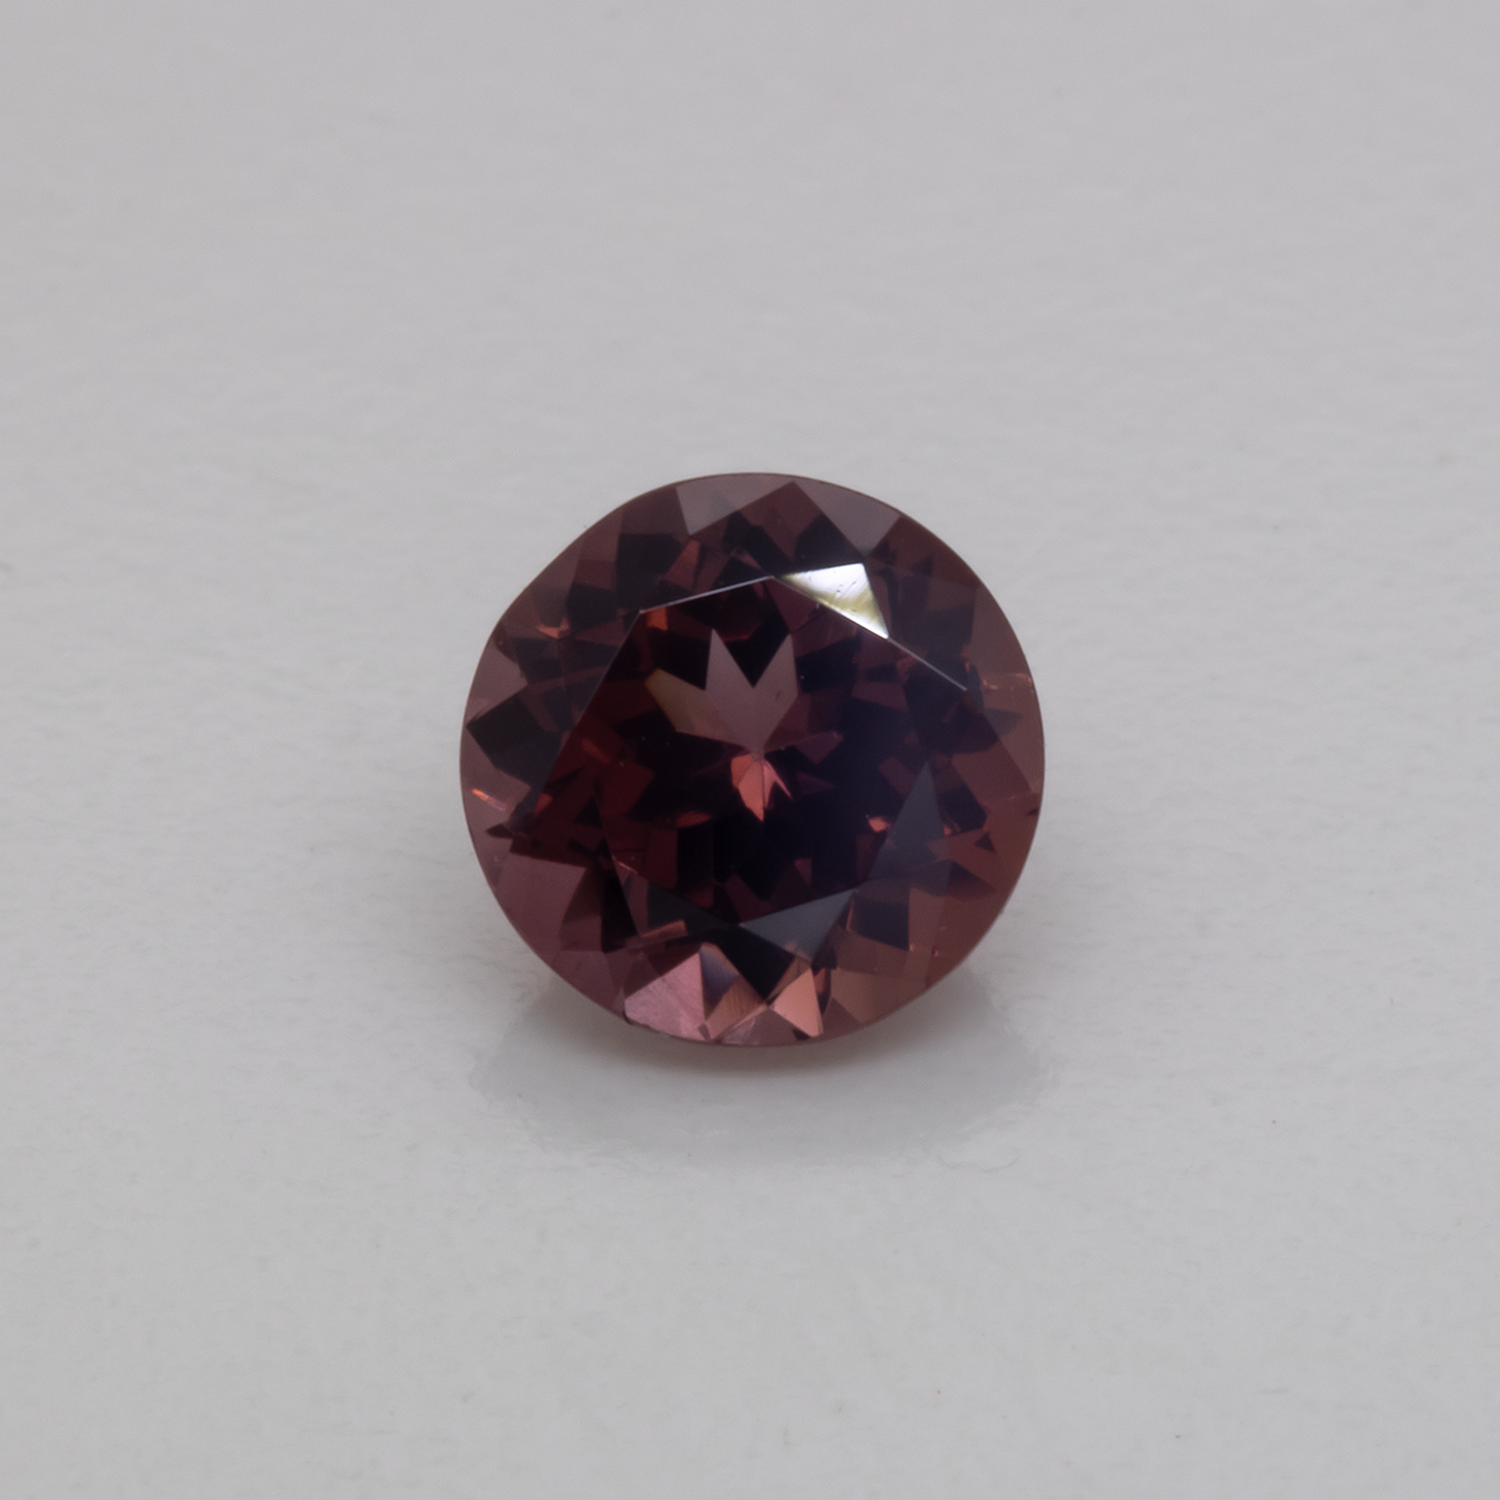 Spinel - red, round, 5.1x5.1 mm, 0.55 cts, No. SP90016